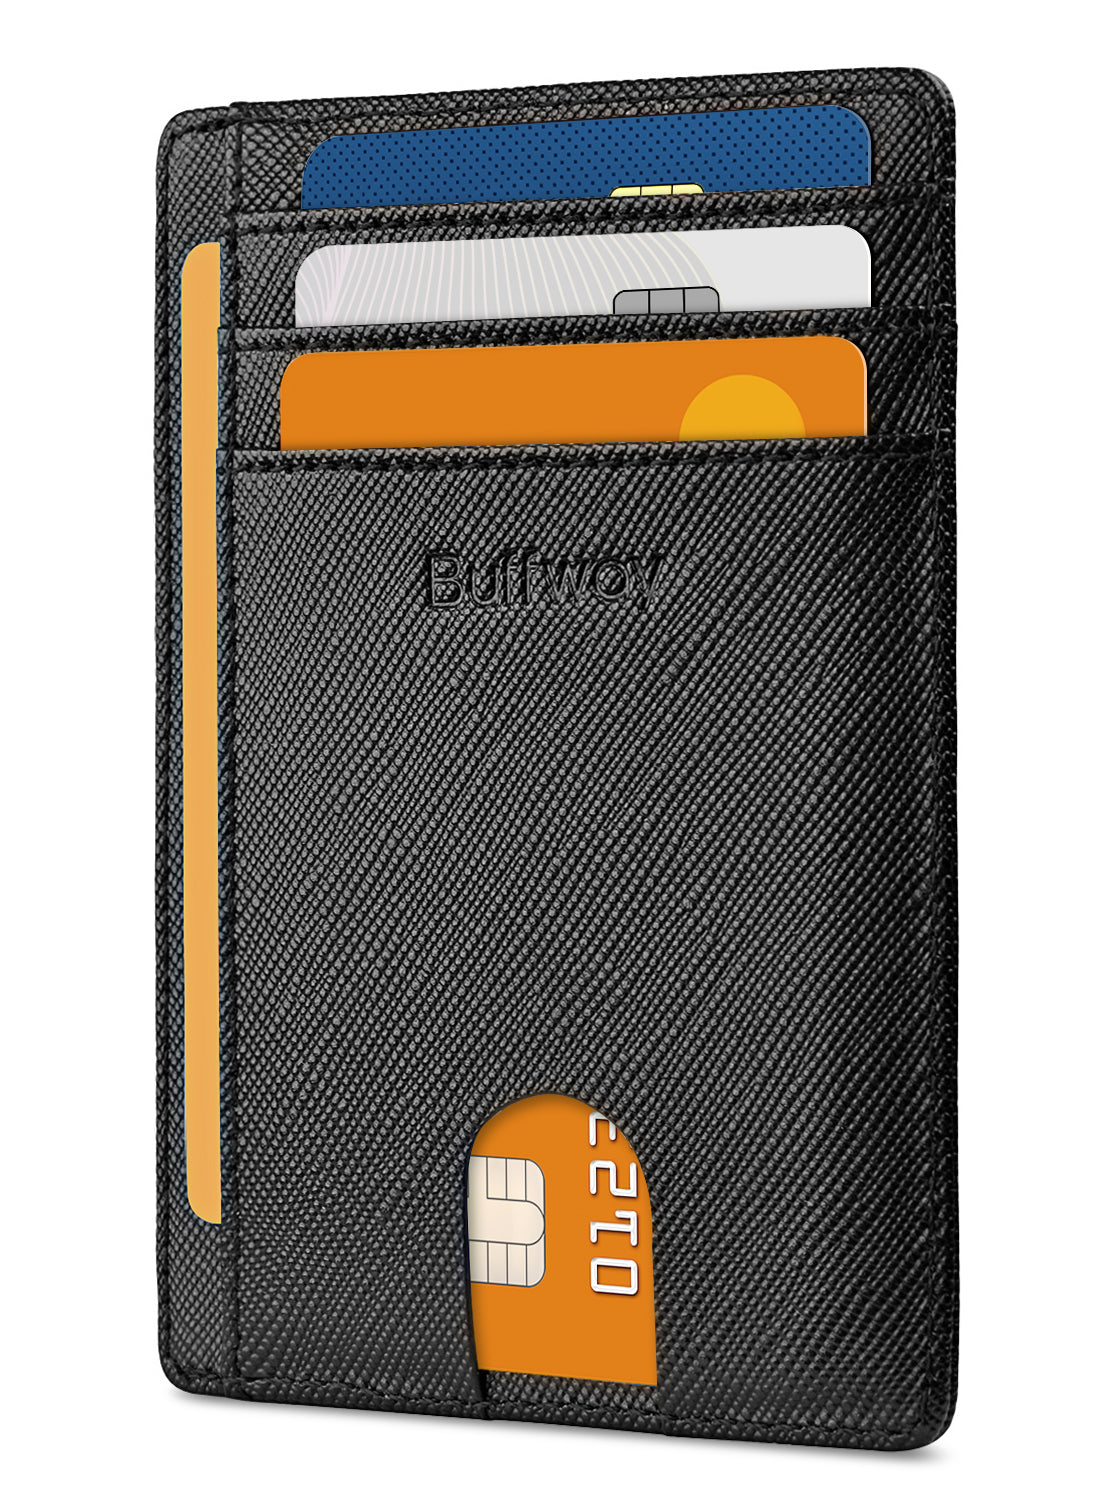 Buffway Slim Minimalist Front Pocket RFID Blocking Leather Wallets for Men and Women - Cross Black